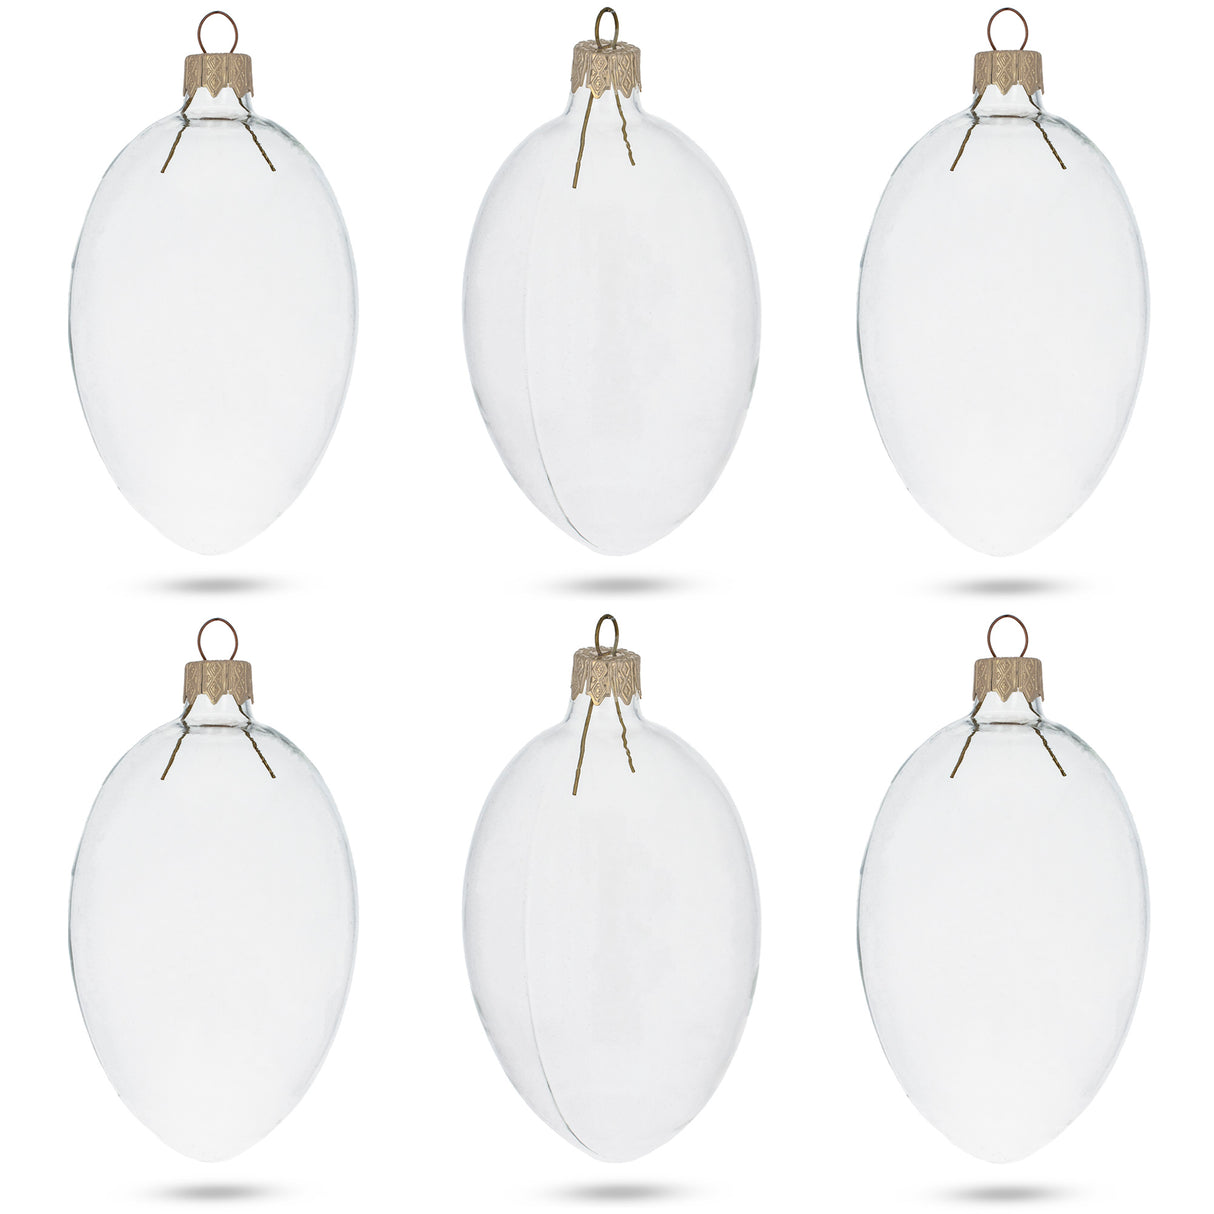 Glass Set of 6 Clear Glass Egg Ornaments DIY Craft 4 Inches in Clear color Oval